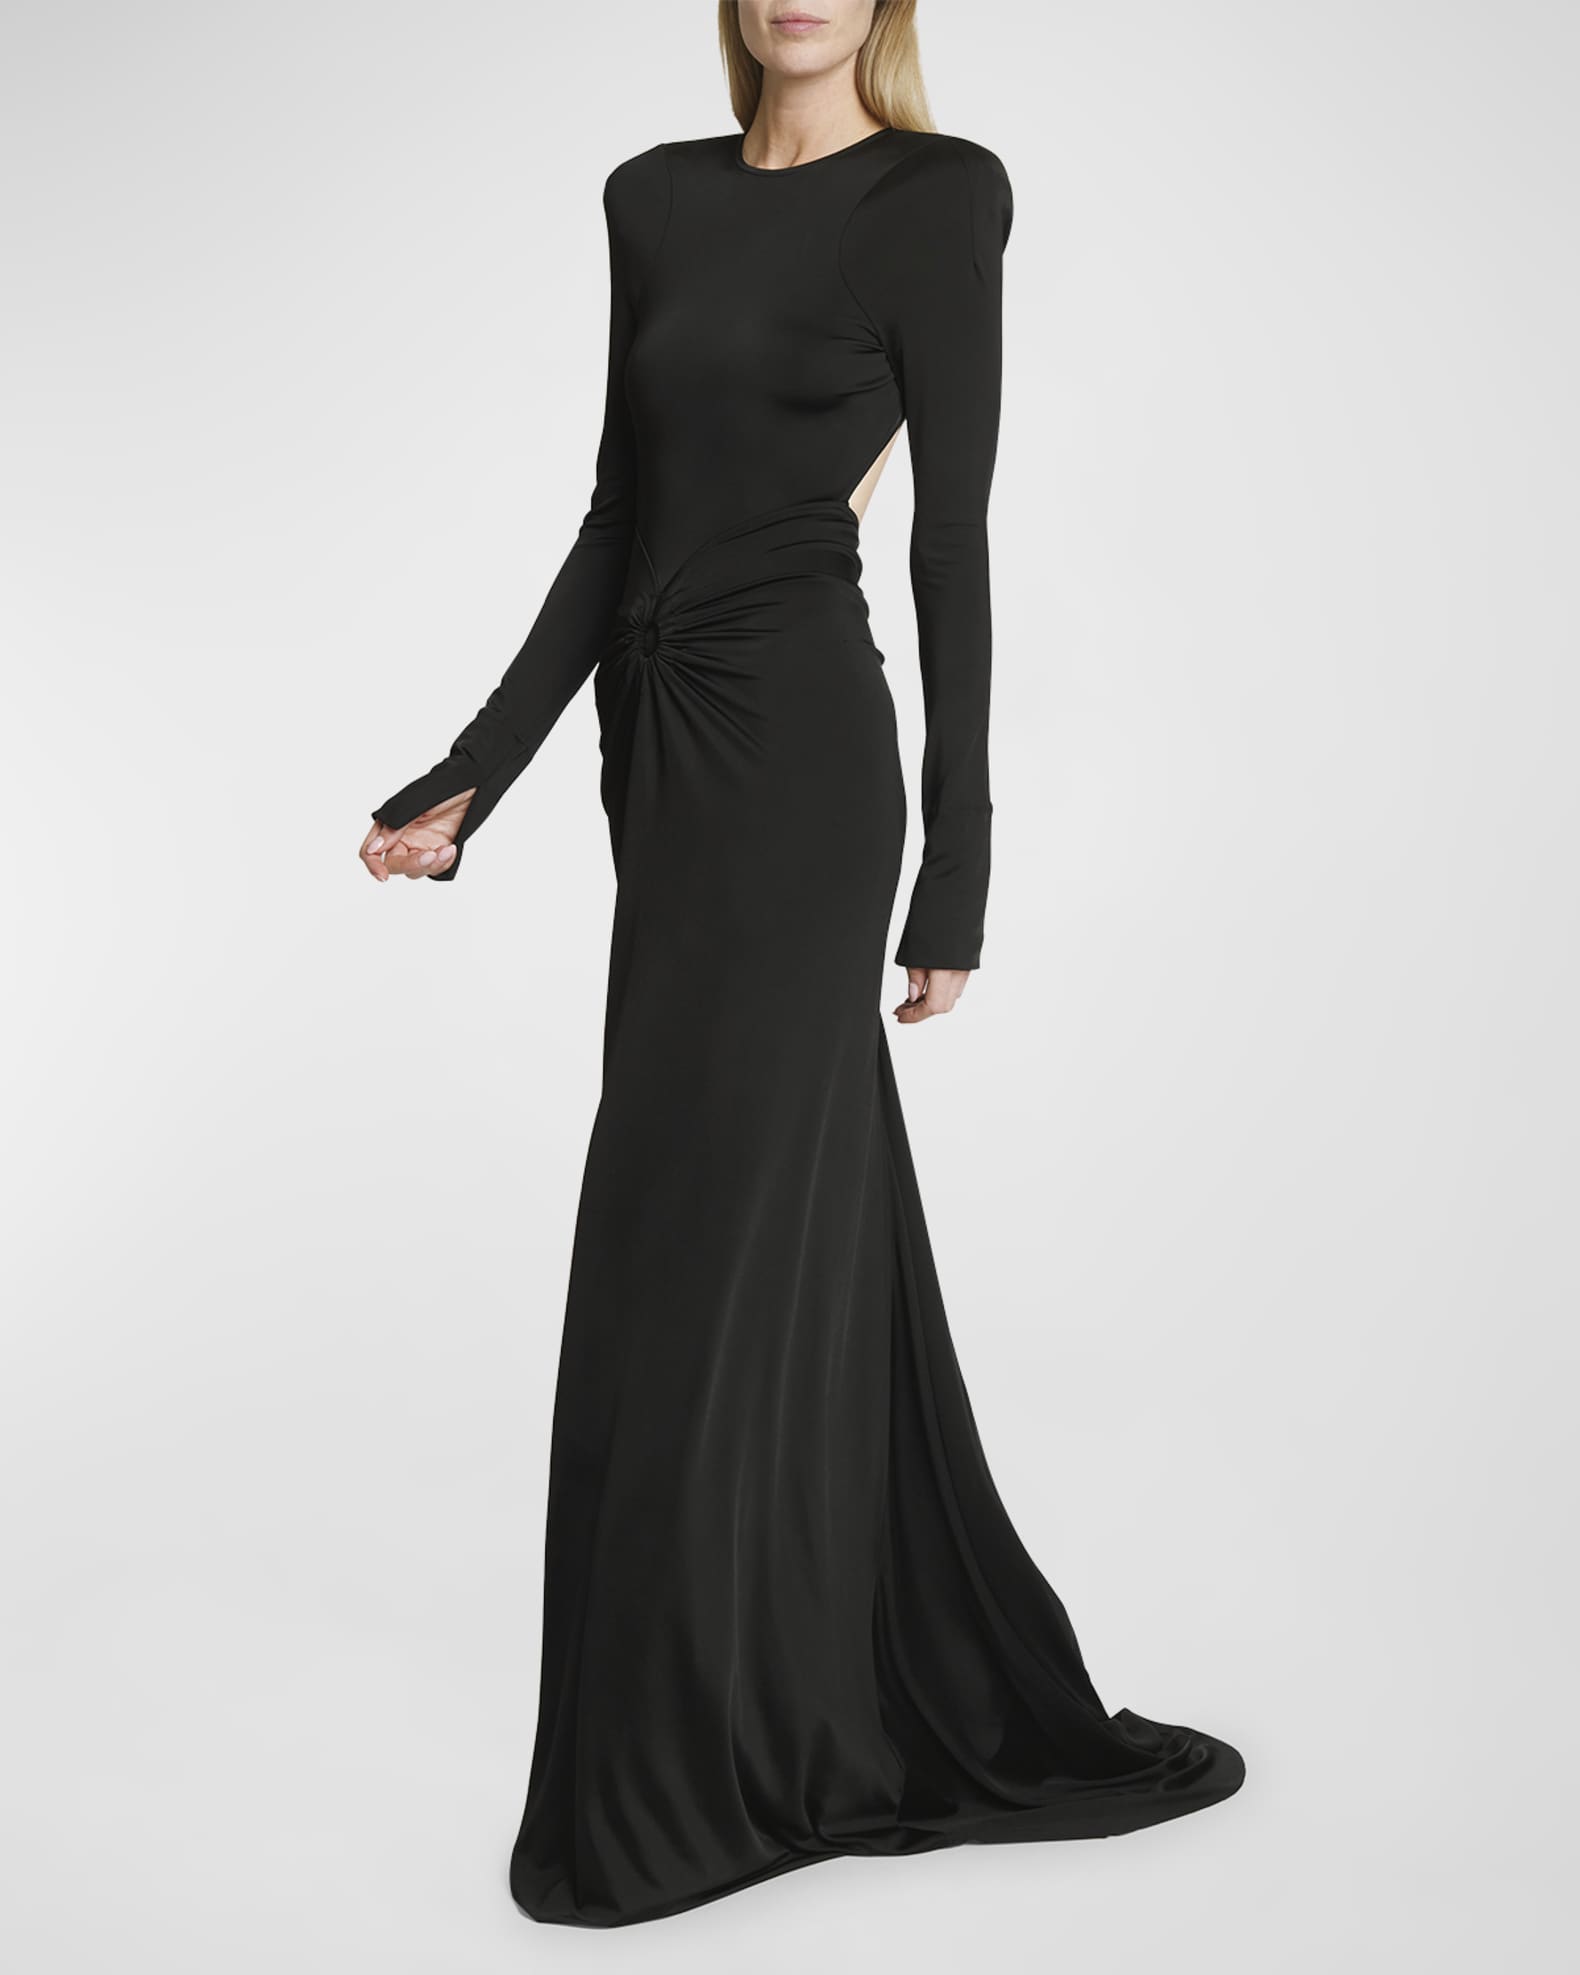 Victoria Beckham Open Back Gown with Gathered Circle Detail | Neiman Marcus